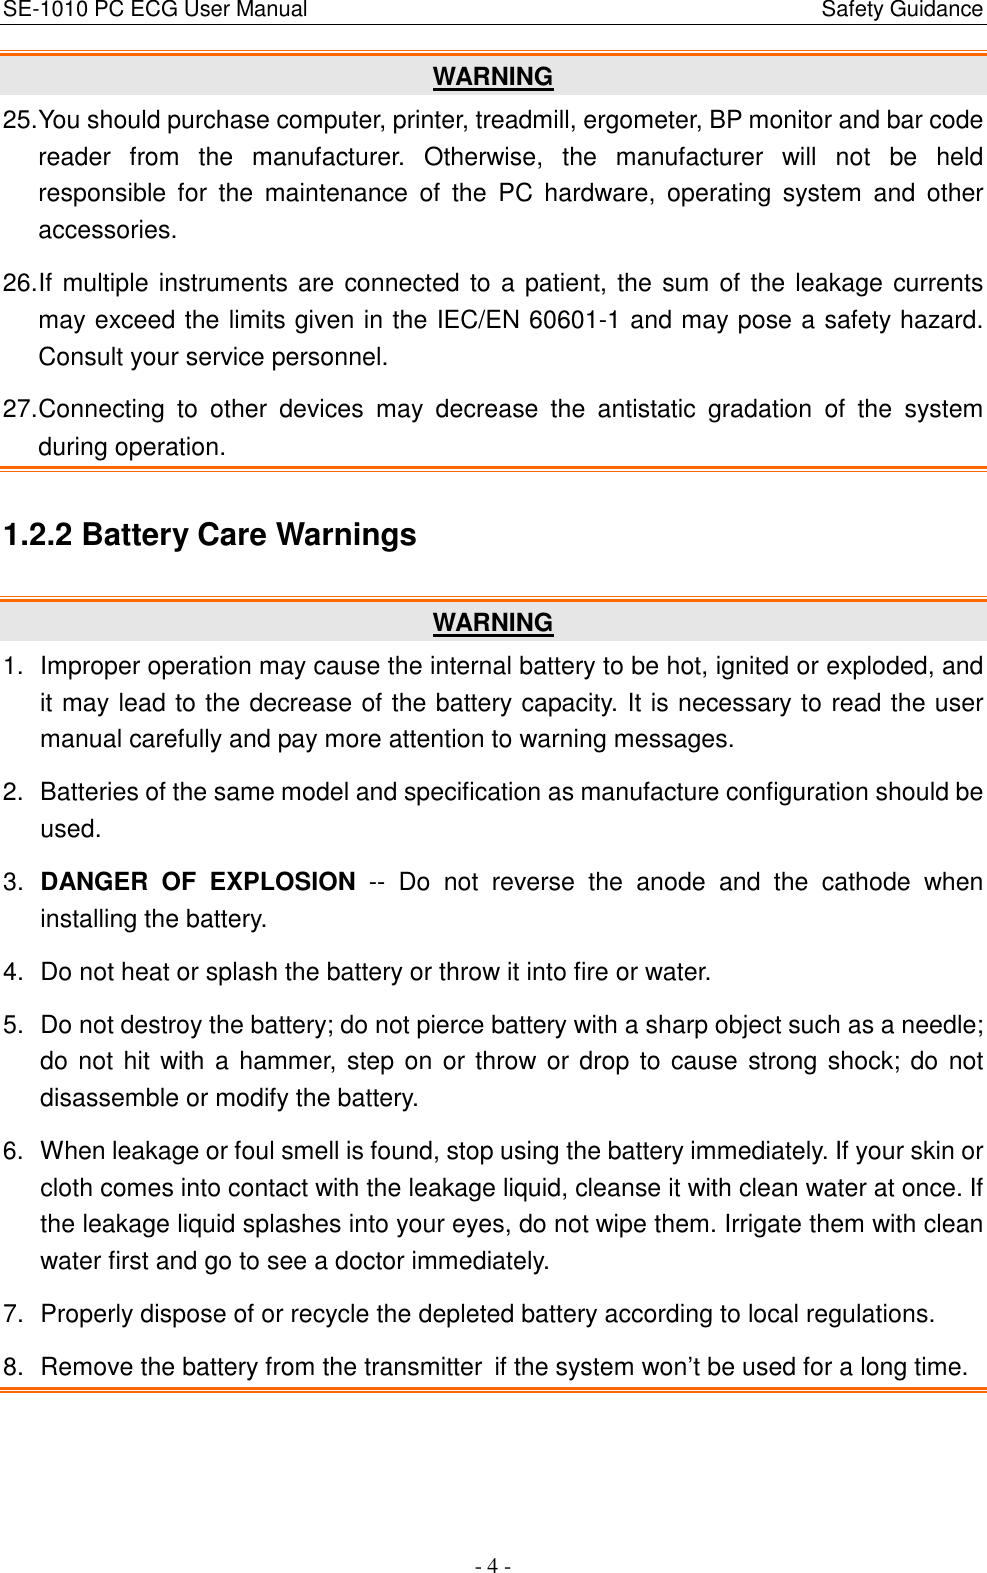 SE-1010 PC ECG User Manual                                                                                              Safety Guidance - 4 - WARNING 25. You should purchase computer, printer, treadmill, ergometer, BP monitor and bar code reader  from  the  manufacturer.  Otherwise,  the  manufacturer  will  not  be  held responsible  for  the  maintenance  of  the  PC  hardware,  operating  system  and  other accessories. 26. If multiple instruments are connected to a patient, the sum of the leakage currents may exceed the limits given in the IEC/EN 60601-1 and may pose a safety hazard. Consult your service personnel. 27. Connecting  to  other  devices  may  decrease  the  antistatic  gradation  of  the  system during operation. 1.2.2 Battery Care Warnings   WARNING 1.  Improper operation may cause the internal battery to be hot, ignited or exploded, and it may lead to the decrease of the battery capacity. It is necessary to read the user manual carefully and pay more attention to warning messages. 2.  Batteries of the same model and specification as manufacture configuration should be used. 3.  DANGER  OF  EXPLOSION  --  Do  not  reverse  the  anode  and  the  cathode  when installing the battery. 4.  Do not heat or splash the battery or throw it into fire or water. 5.  Do not destroy the battery; do not pierce battery with a sharp object such as a needle; do not hit with  a hammer, step on or throw or drop to cause strong shock; do not disassemble or modify the battery. 6.  When leakage or foul smell is found, stop using the battery immediately. If your skin or cloth comes into contact with the leakage liquid, cleanse it with clean water at once. If the leakage liquid splashes into your eyes, do not wipe them. Irrigate them with clean water first and go to see a doctor immediately. 7.  Properly dispose of or recycle the depleted battery according to local regulations. 8.  Remove the battery from the transmitter if the system won’t be used for a long time. 